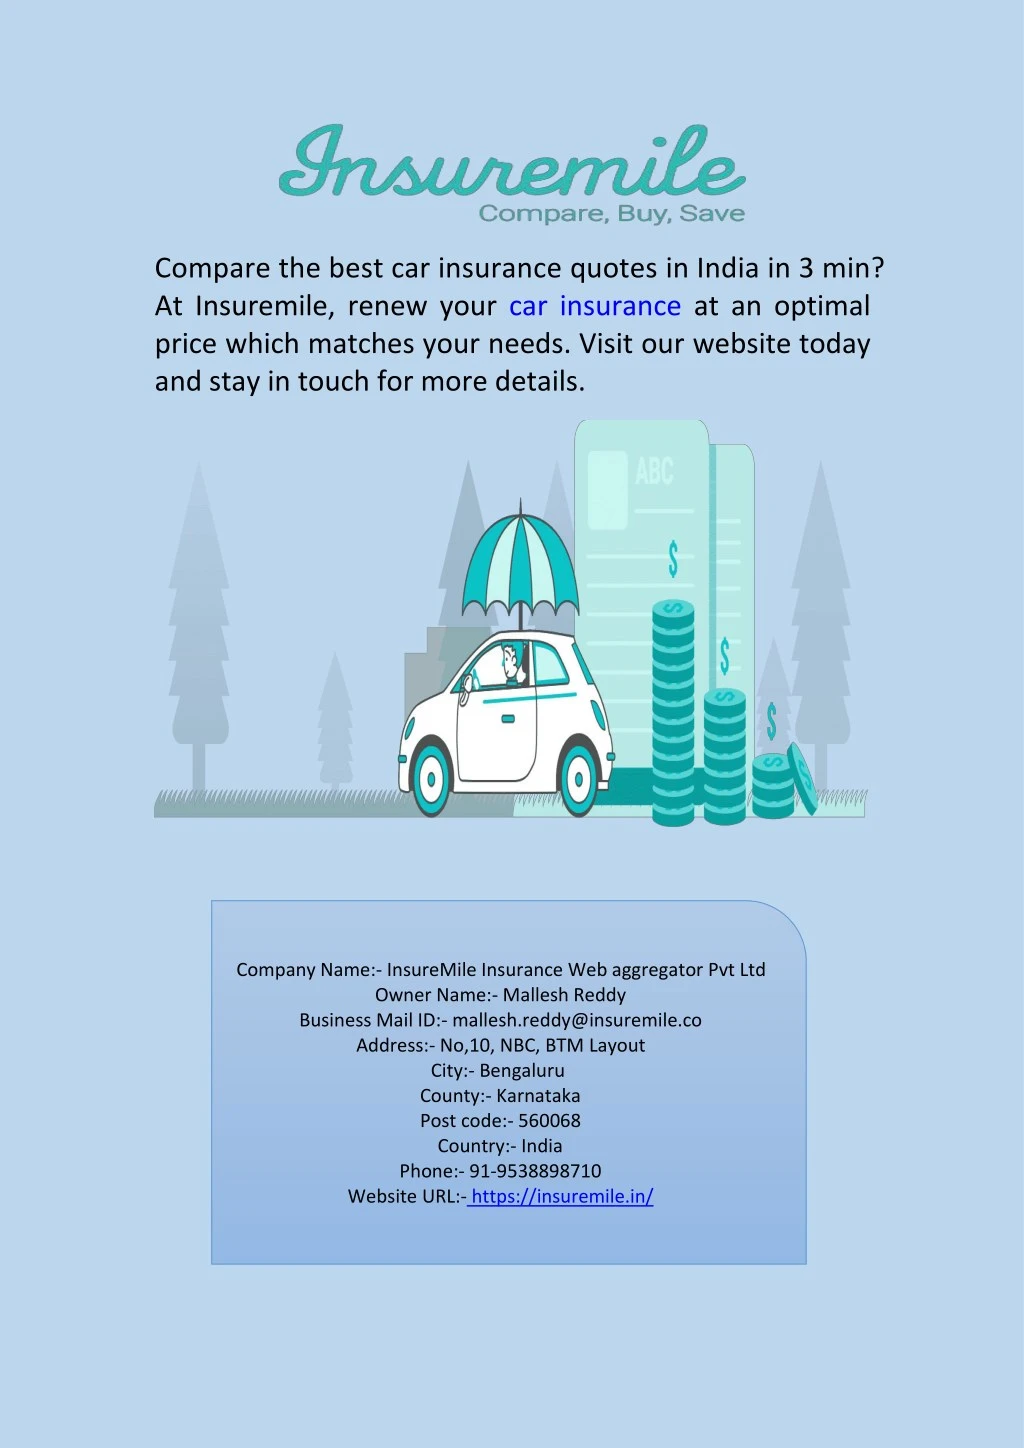 compare the best car insurance quotes in india